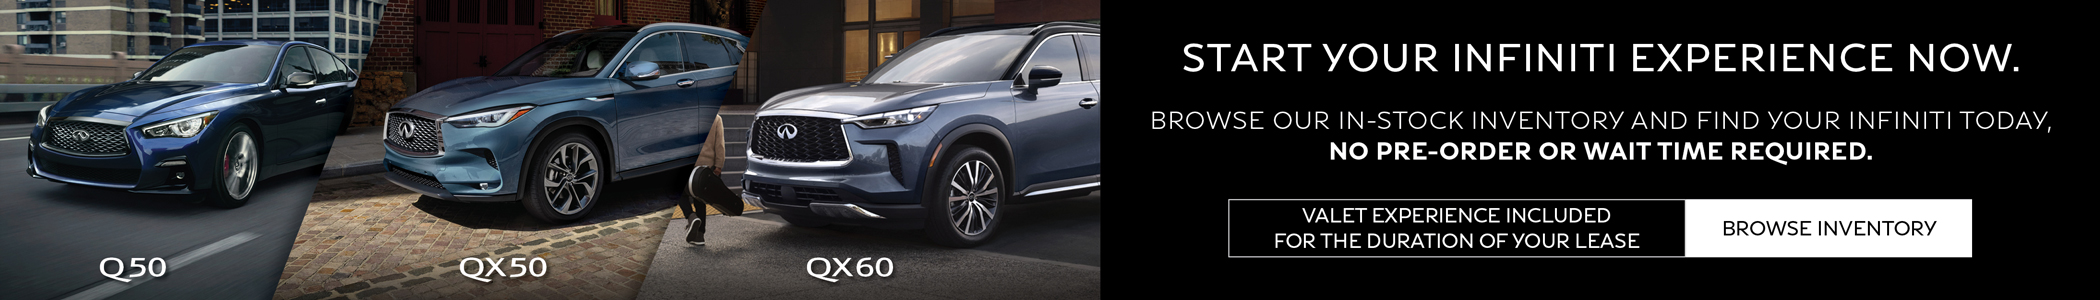 Start Your INFINITI Experience Now